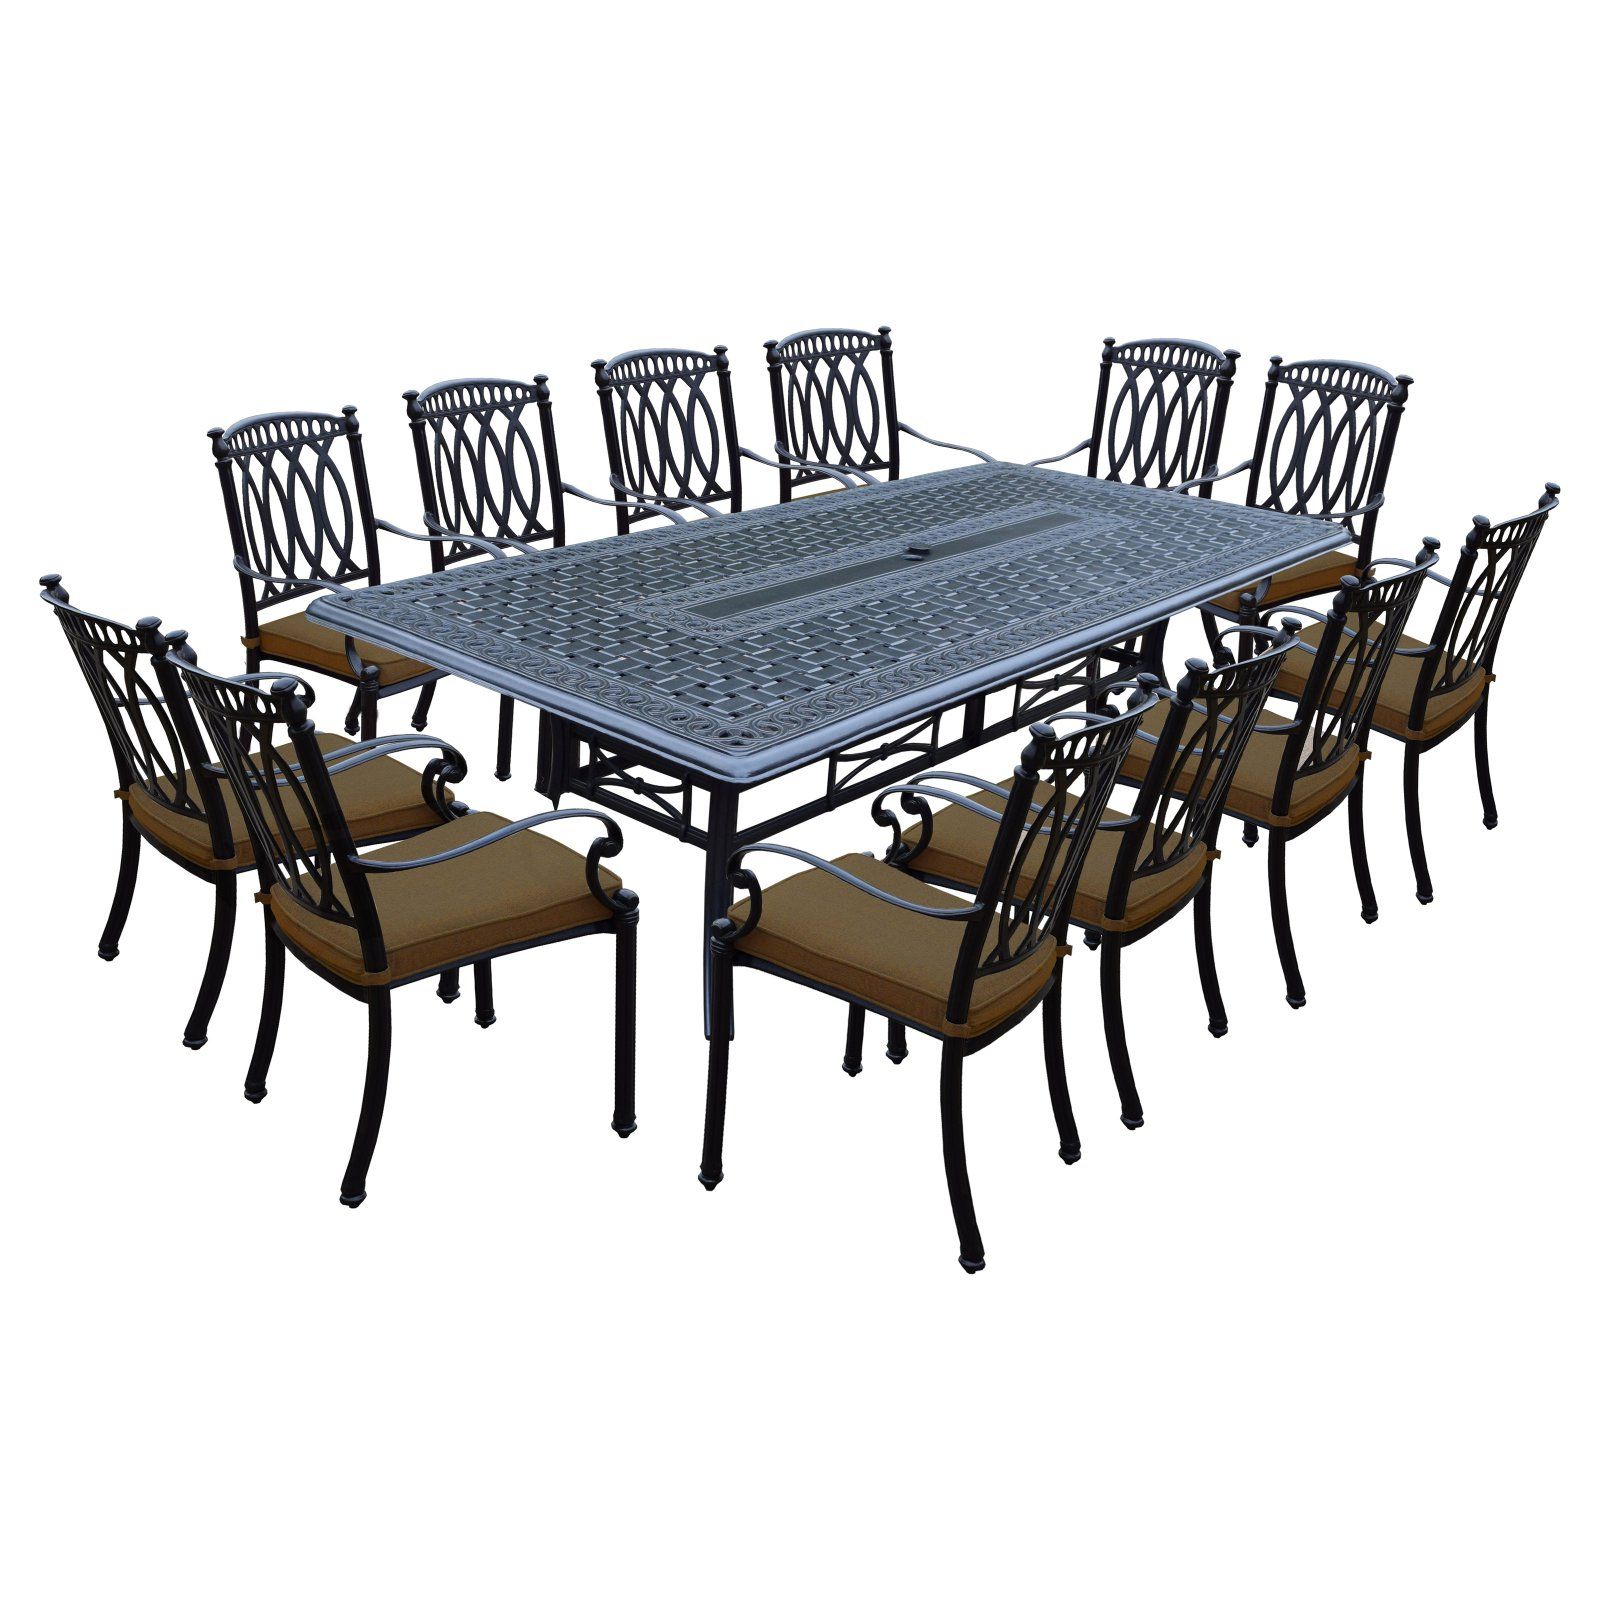 Most Recently Released 13 Piece Extendable Patio Dining Sets In Oakland Living Morocco Aluminum 13 Piece Patio Dining Set – Walmart (View 15 of 15)